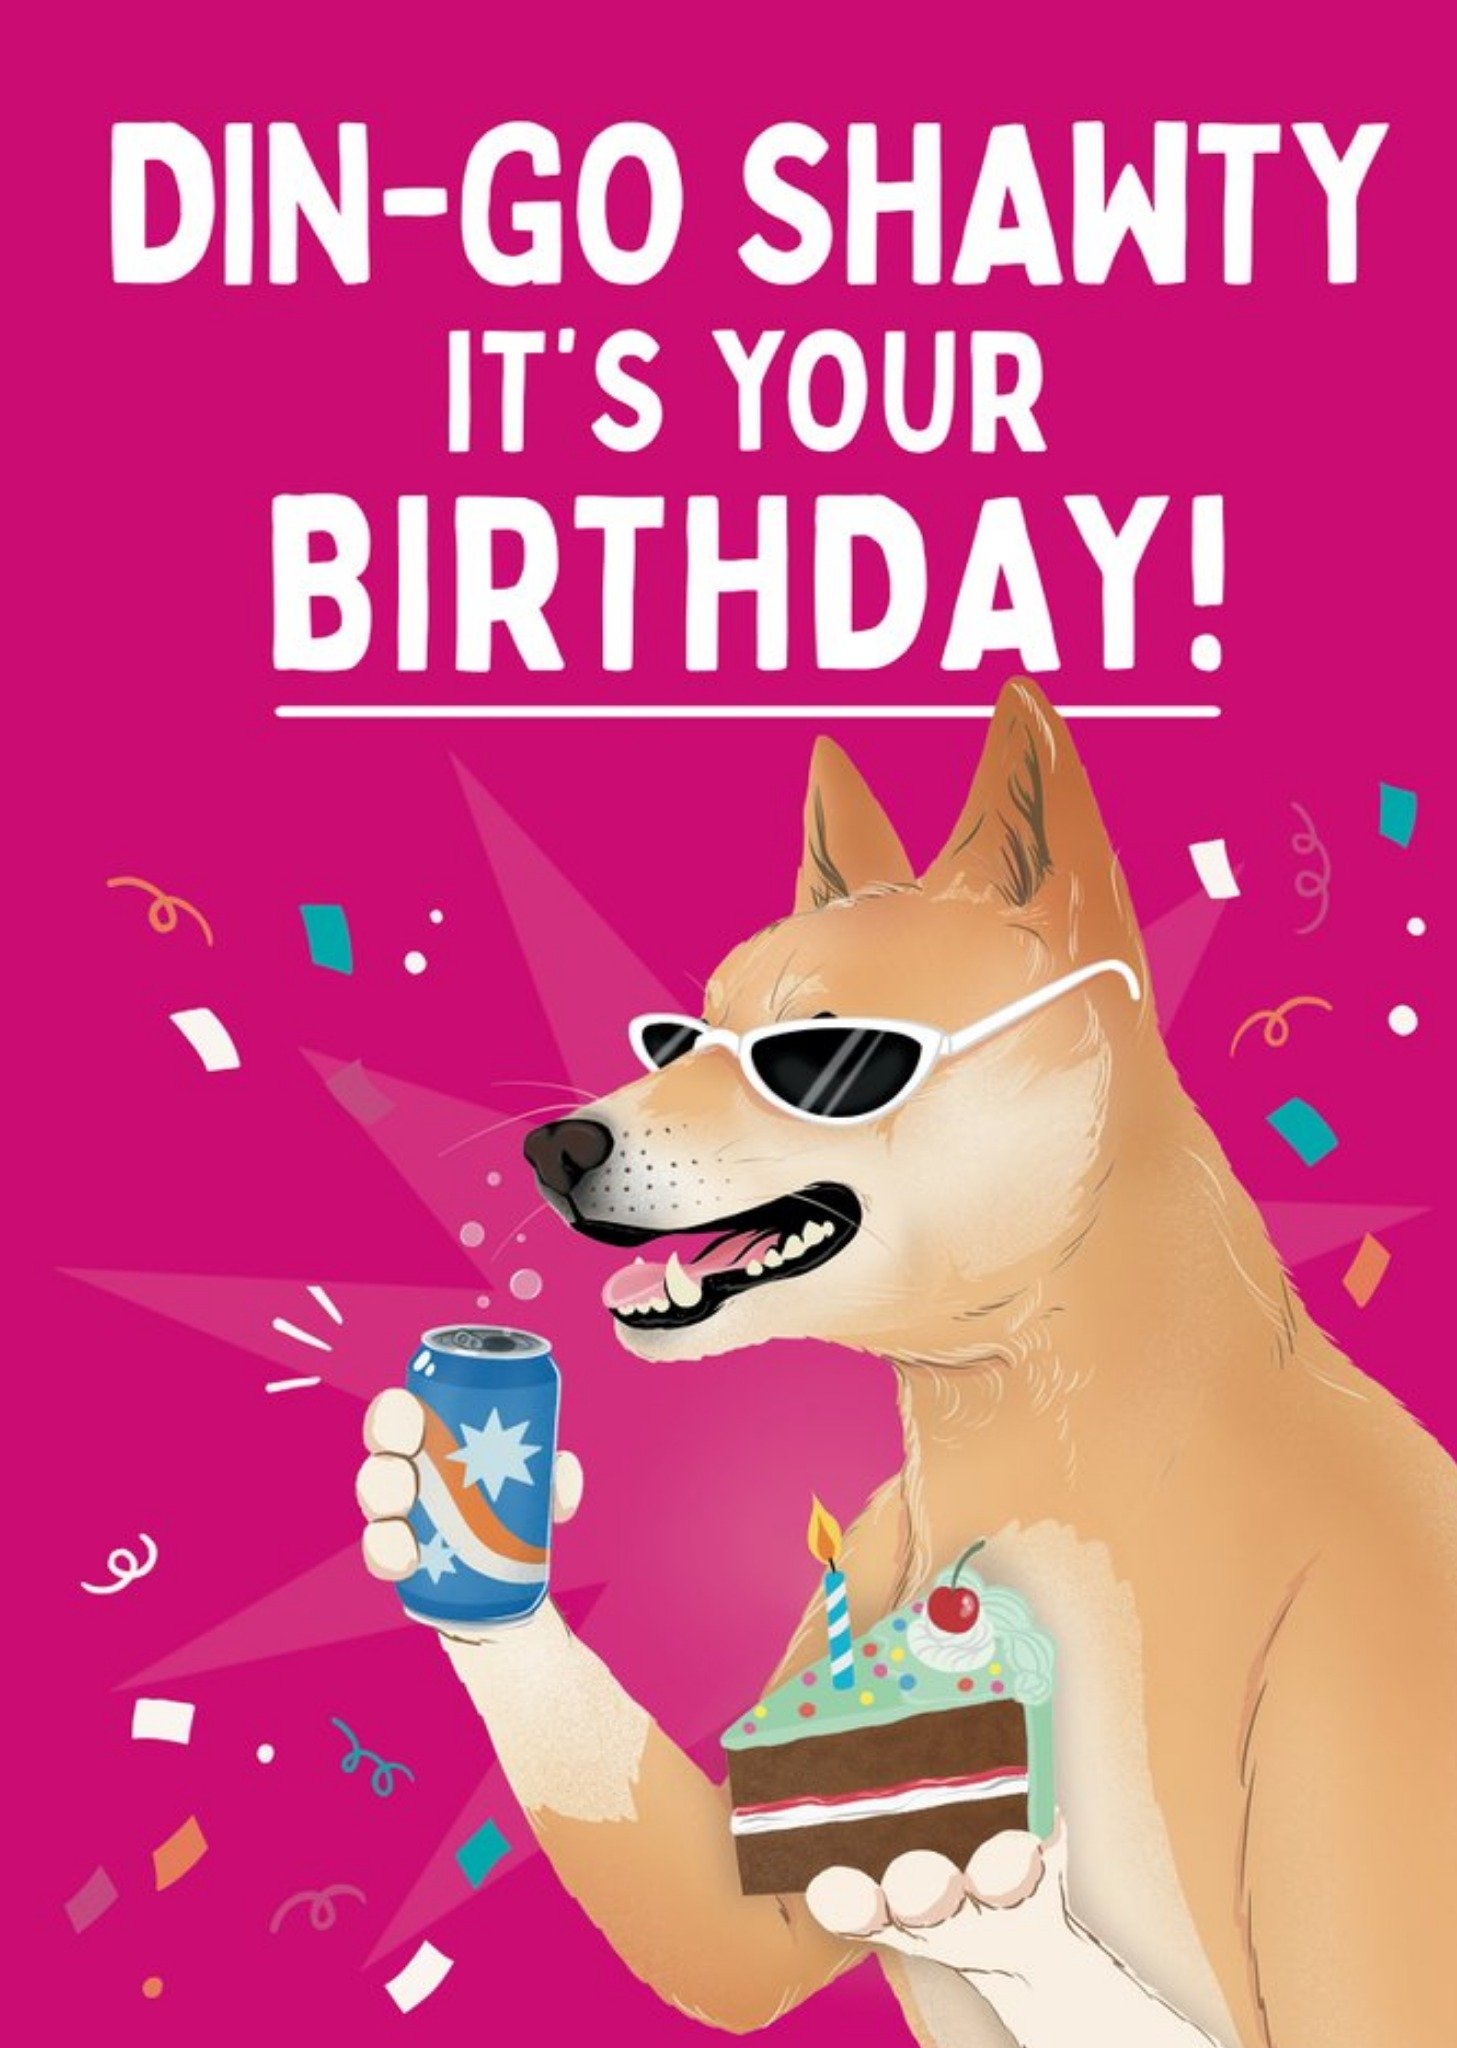 Moonpig Illustration Of A Cool Dingo With Fizzy Pop And Cake Funny Pun Birthday Card Ecard